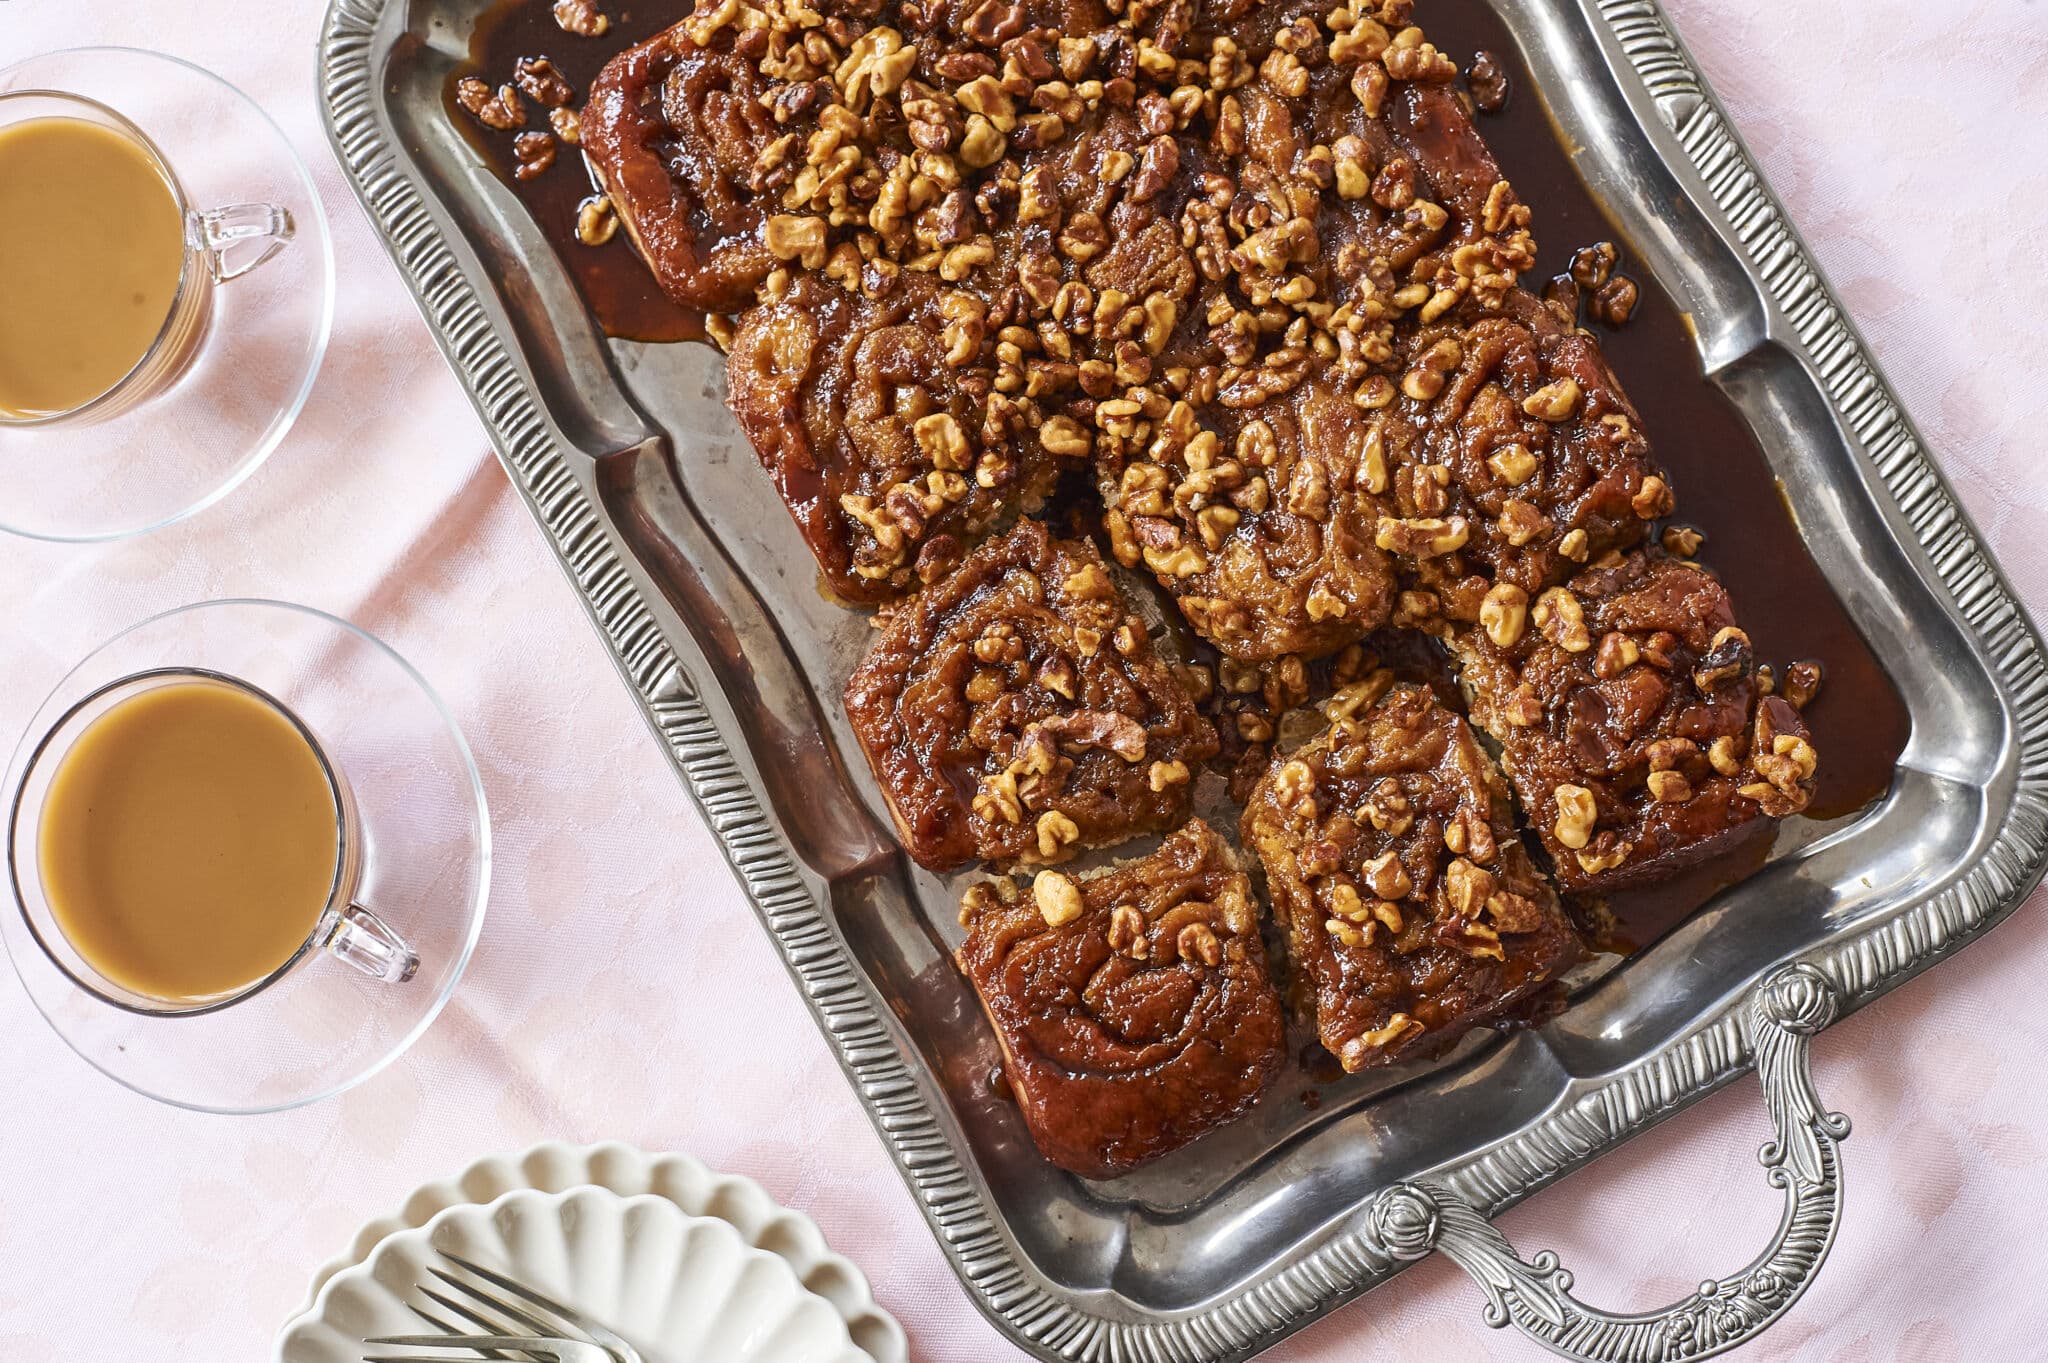 Soft and fluffy cinnamon rolls are packed with bananas and baked golden-brown, served in a silver rectangular plater, topped with toasted walnuts and smooth decadent caramel sauce, perfect to go with tea on the side.